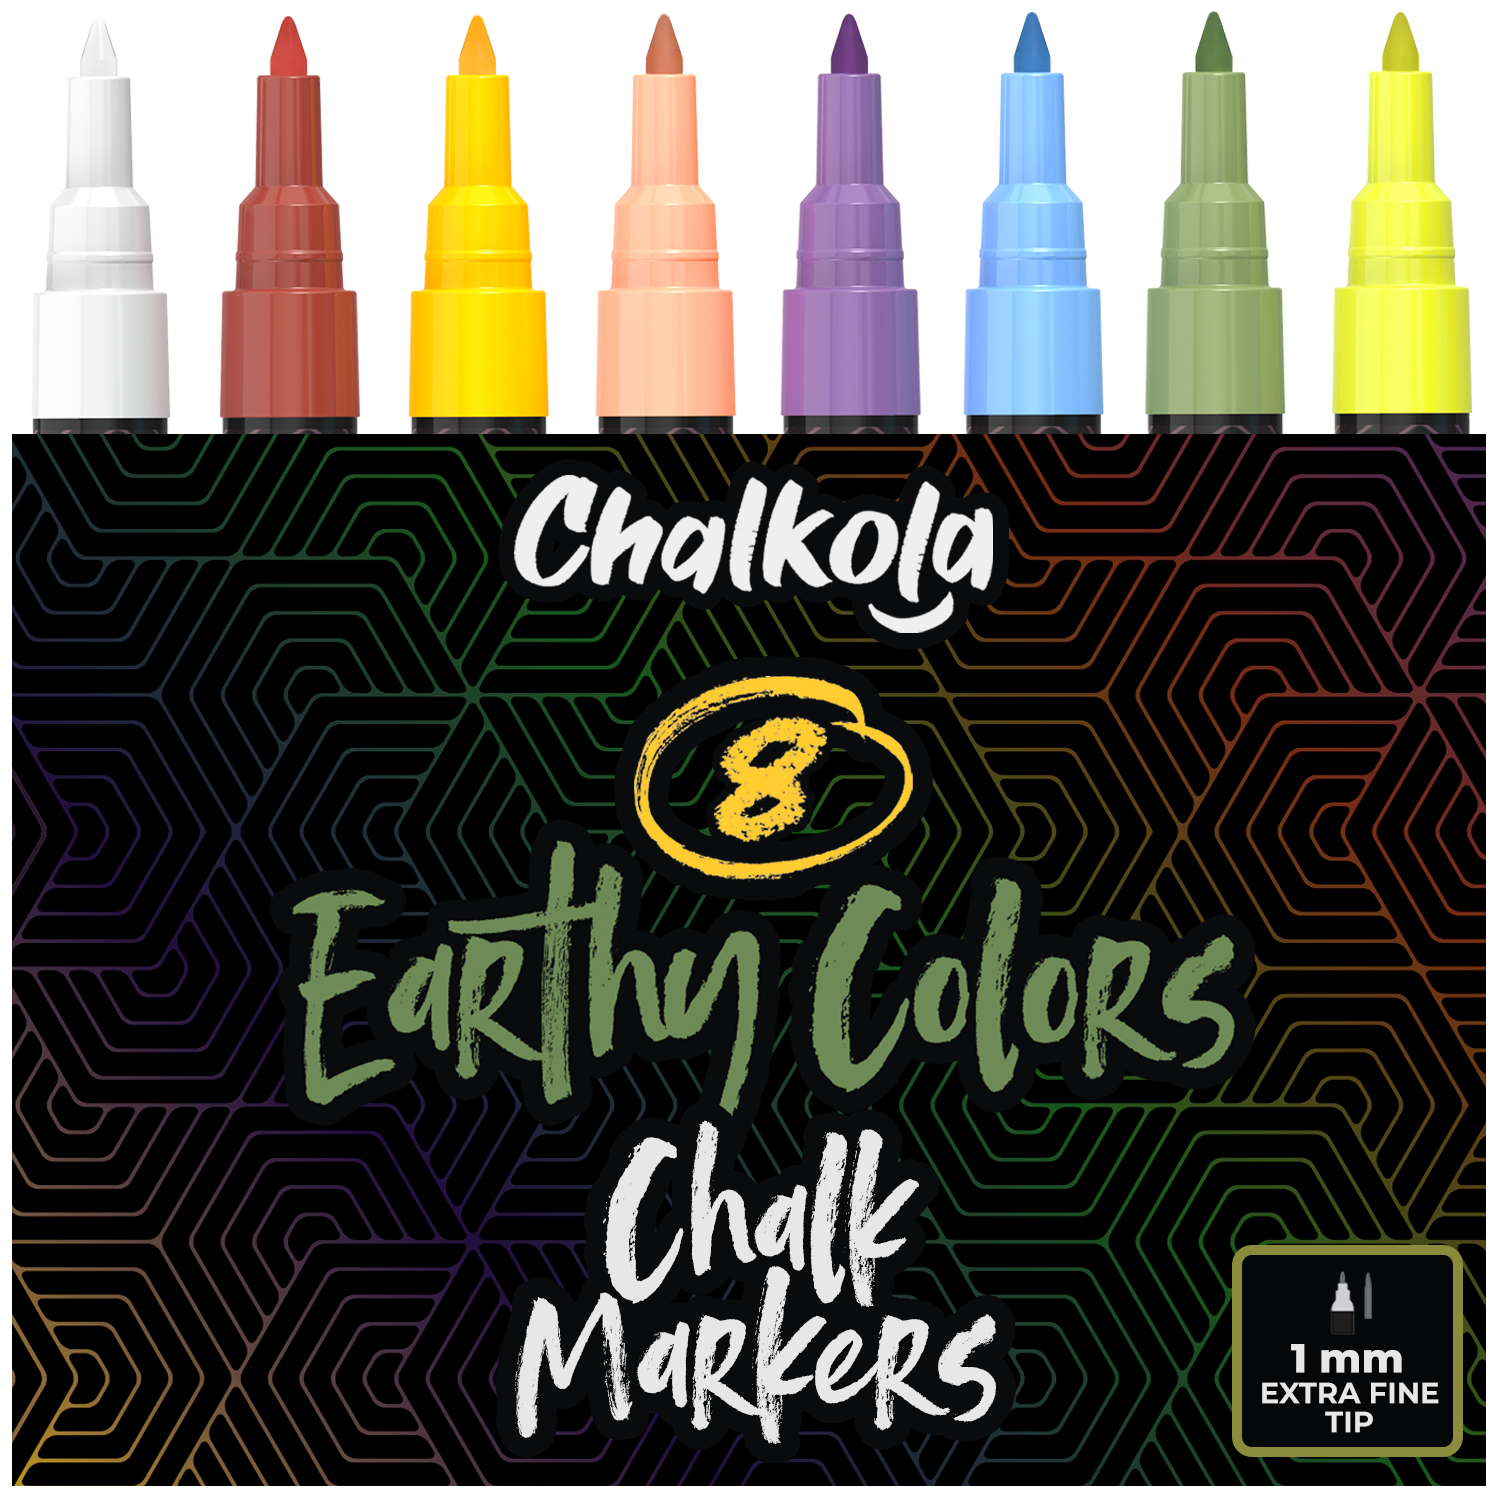 Stippling Paint Technique with Chalk Markers - Chalkola Art Supply